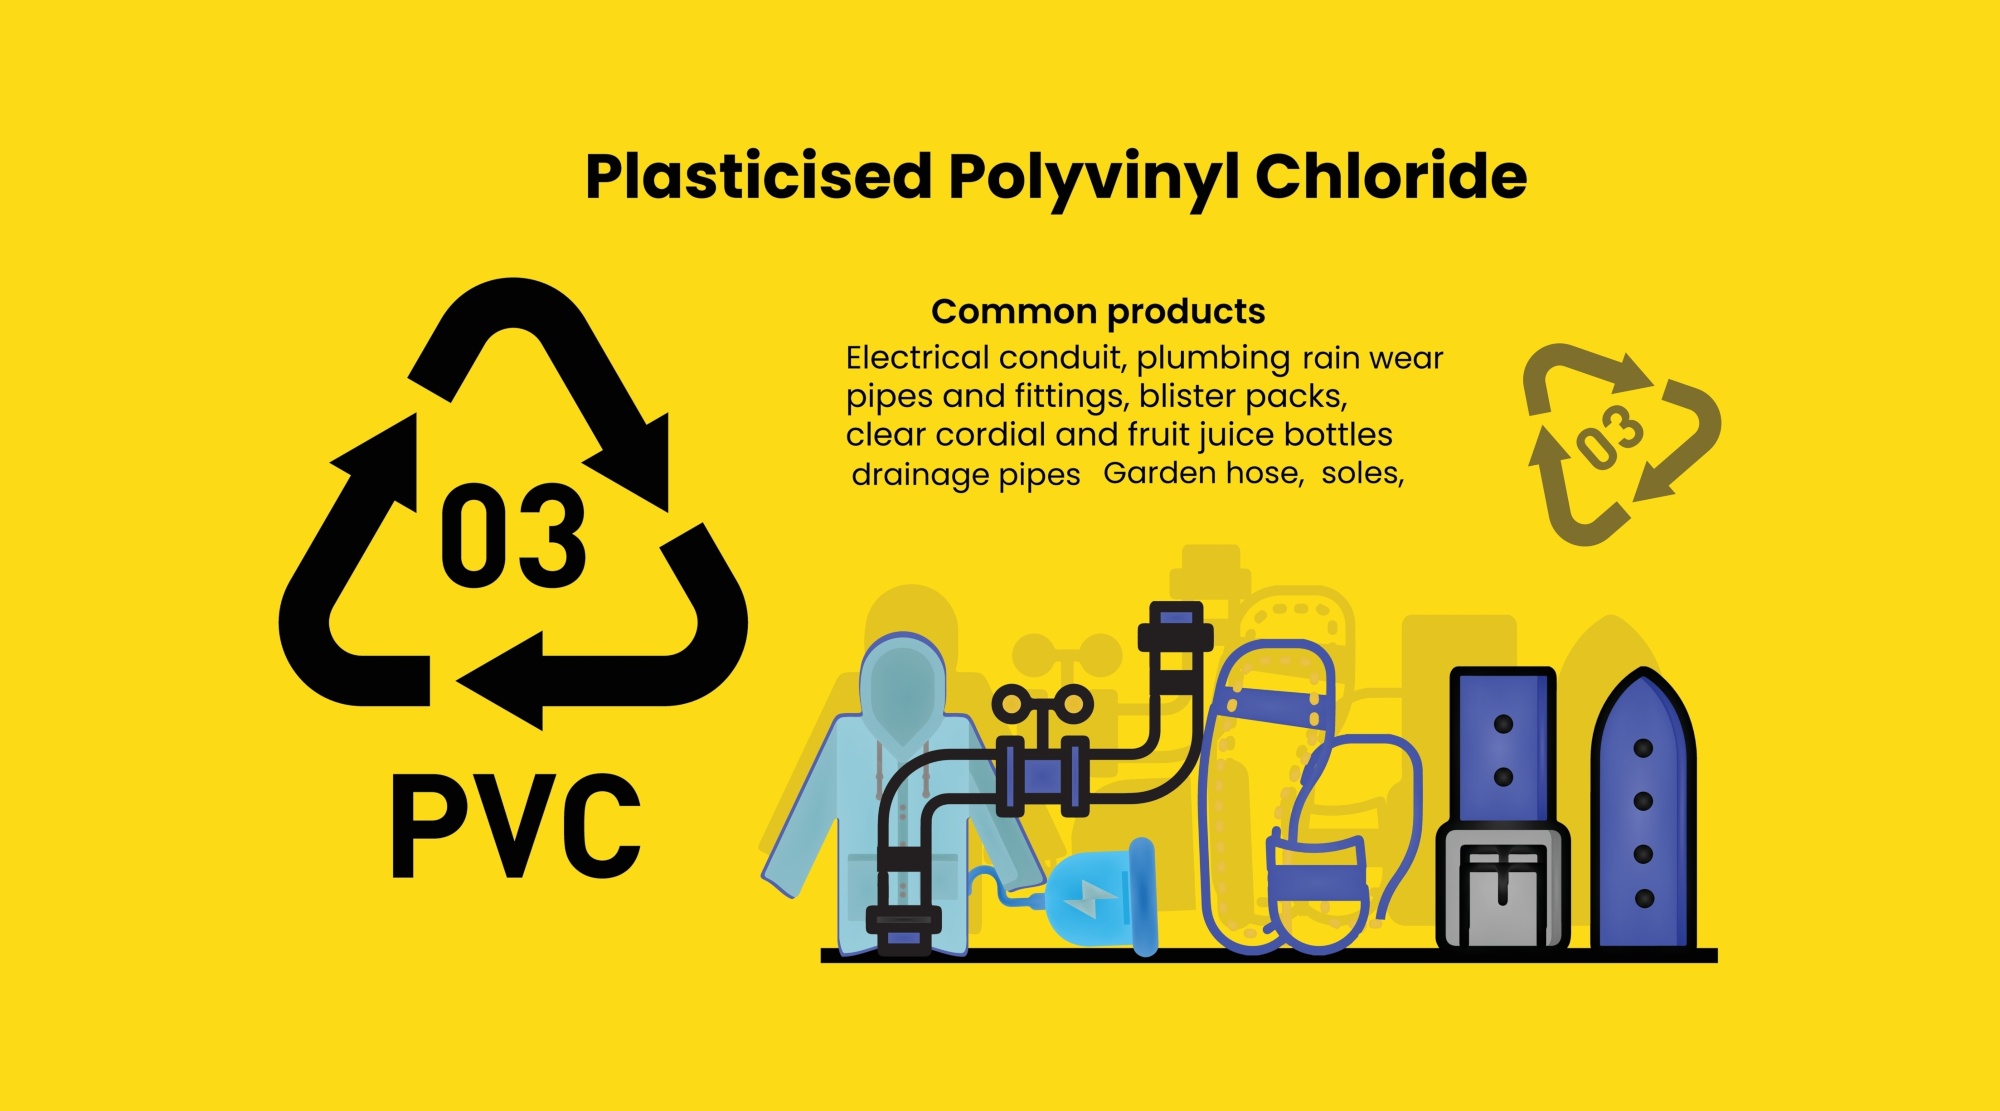 plasticised polyvinyl chloride common products info